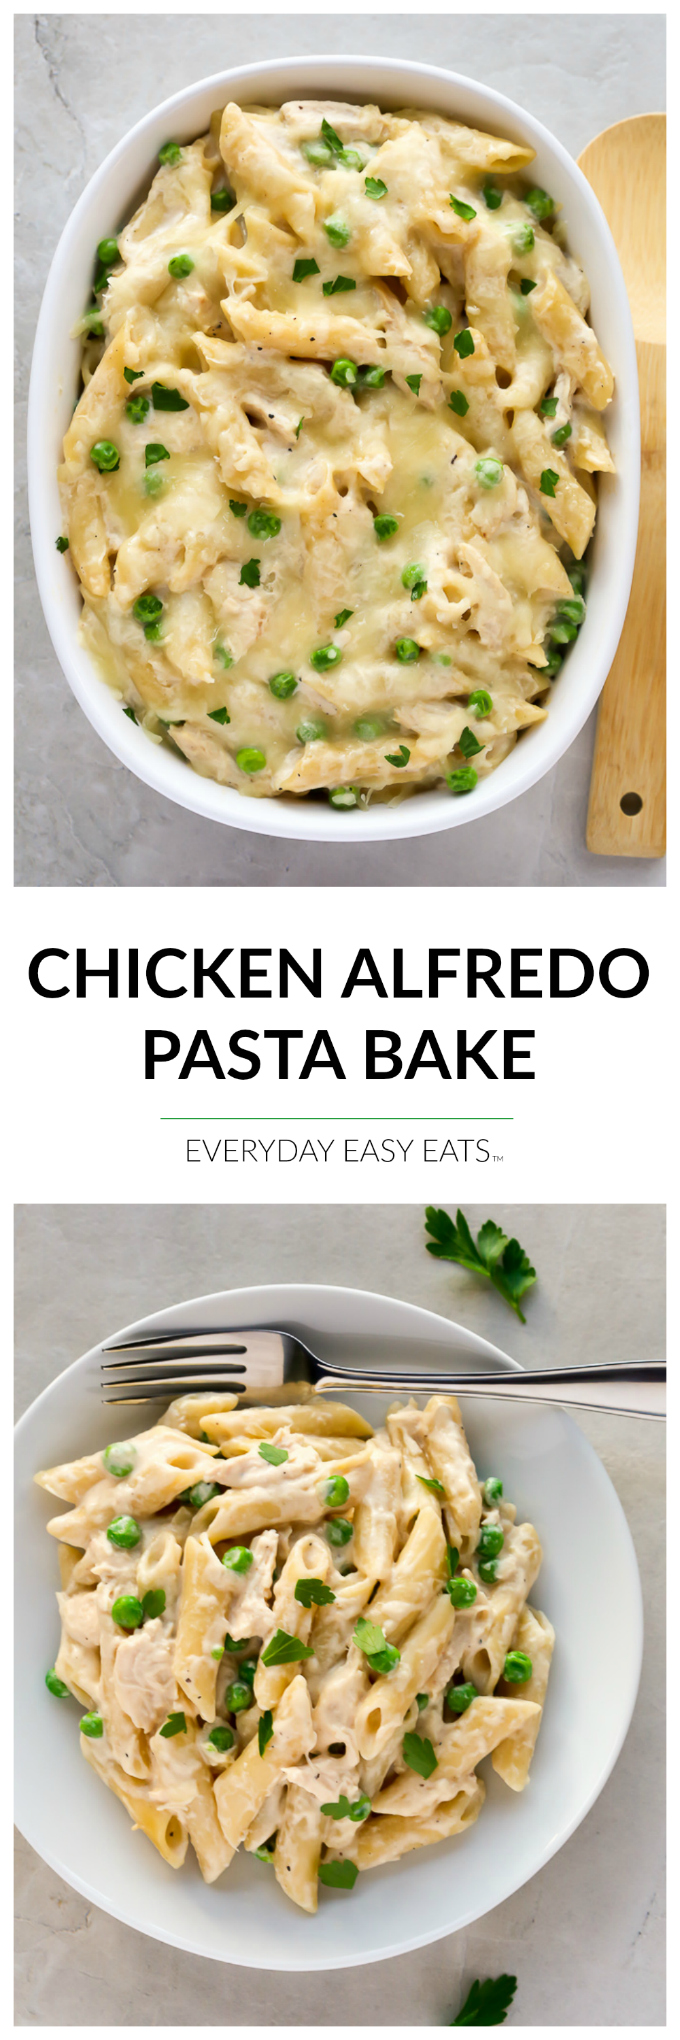 This Chicken Alfredo Pasta Bake recipe requires only 6 ingredients and is ready to eat in about a half an hour! | EverydayEasyEats.com